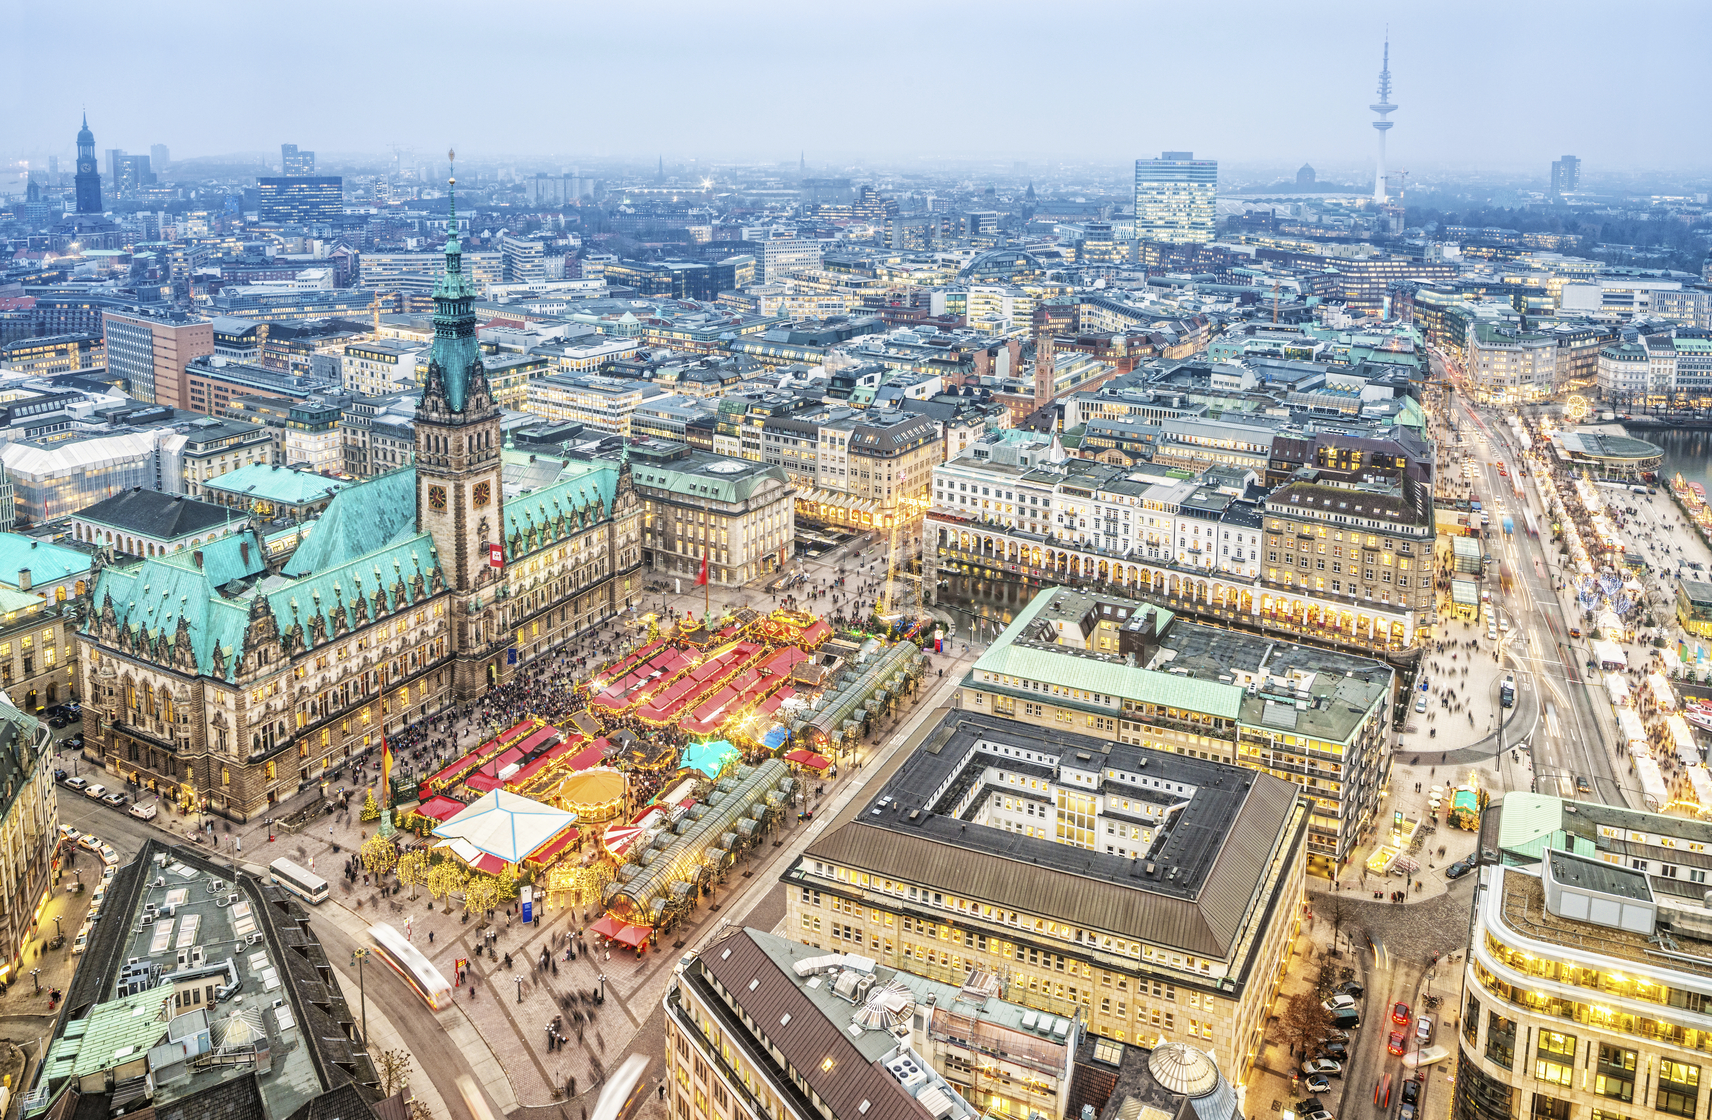 Aerial view on the winterly illuminated city of Hamburg. Christmas decoration, illuminated buildings and streets, the christmas market at the town hall.